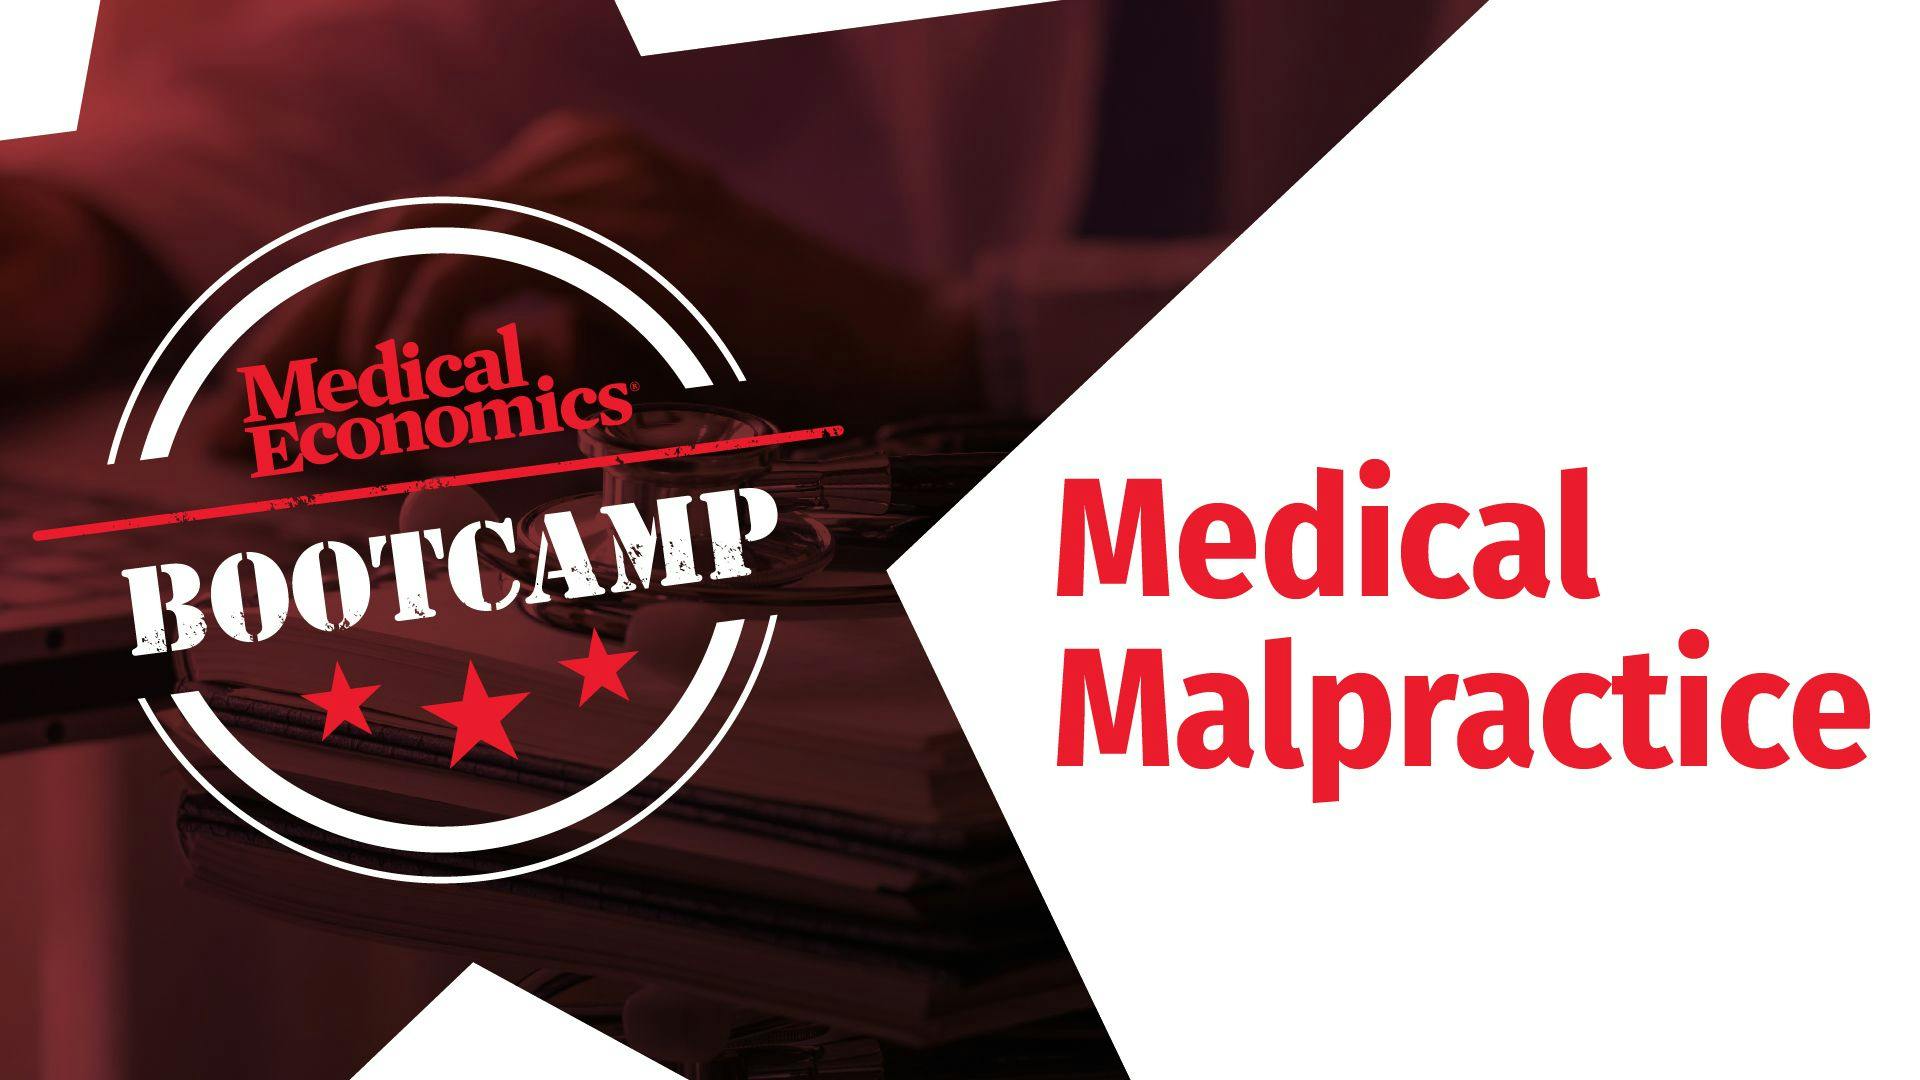 Session 4: Deciphering the Morse Code of Medical Malpractice